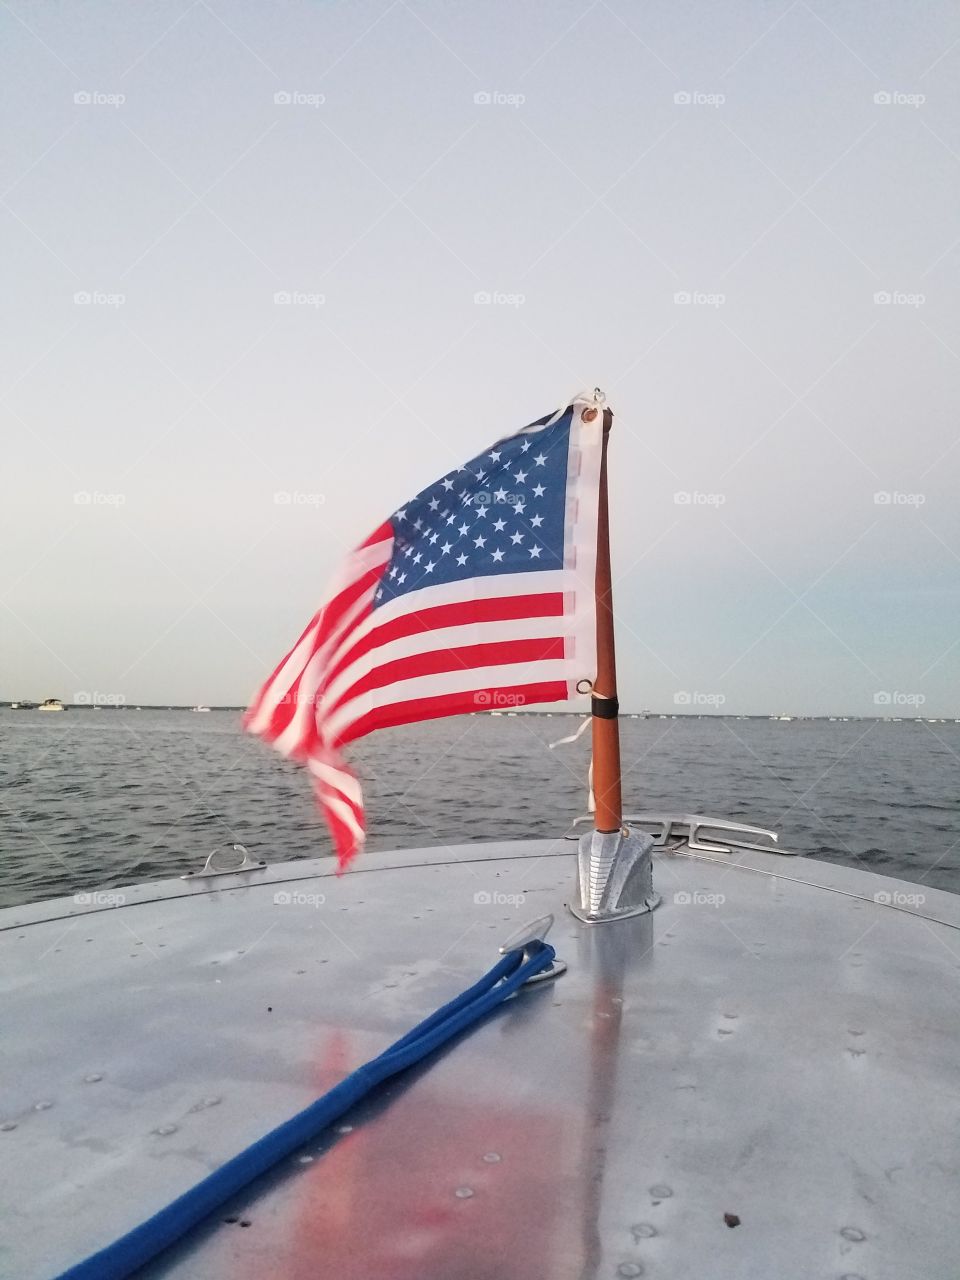 American flag flying over a vintage aluminum boat on the water